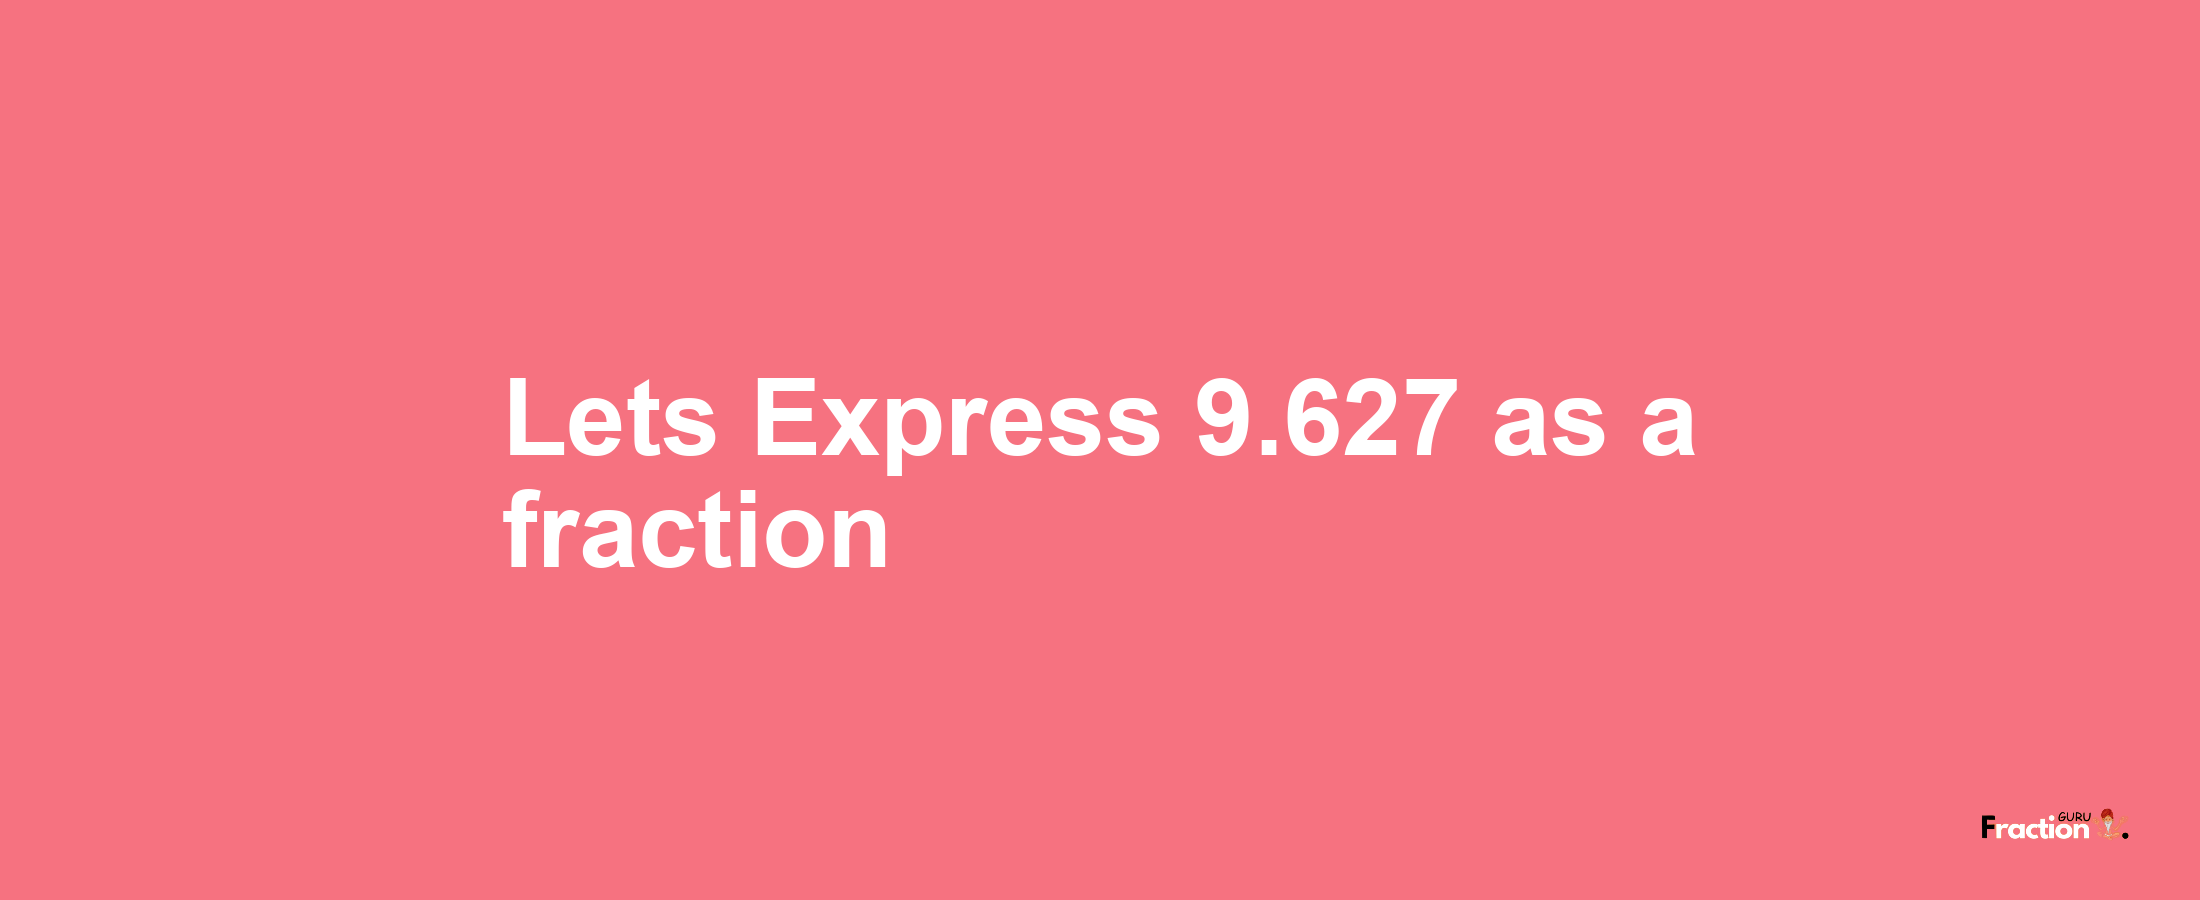 Lets Express 9.627 as afraction